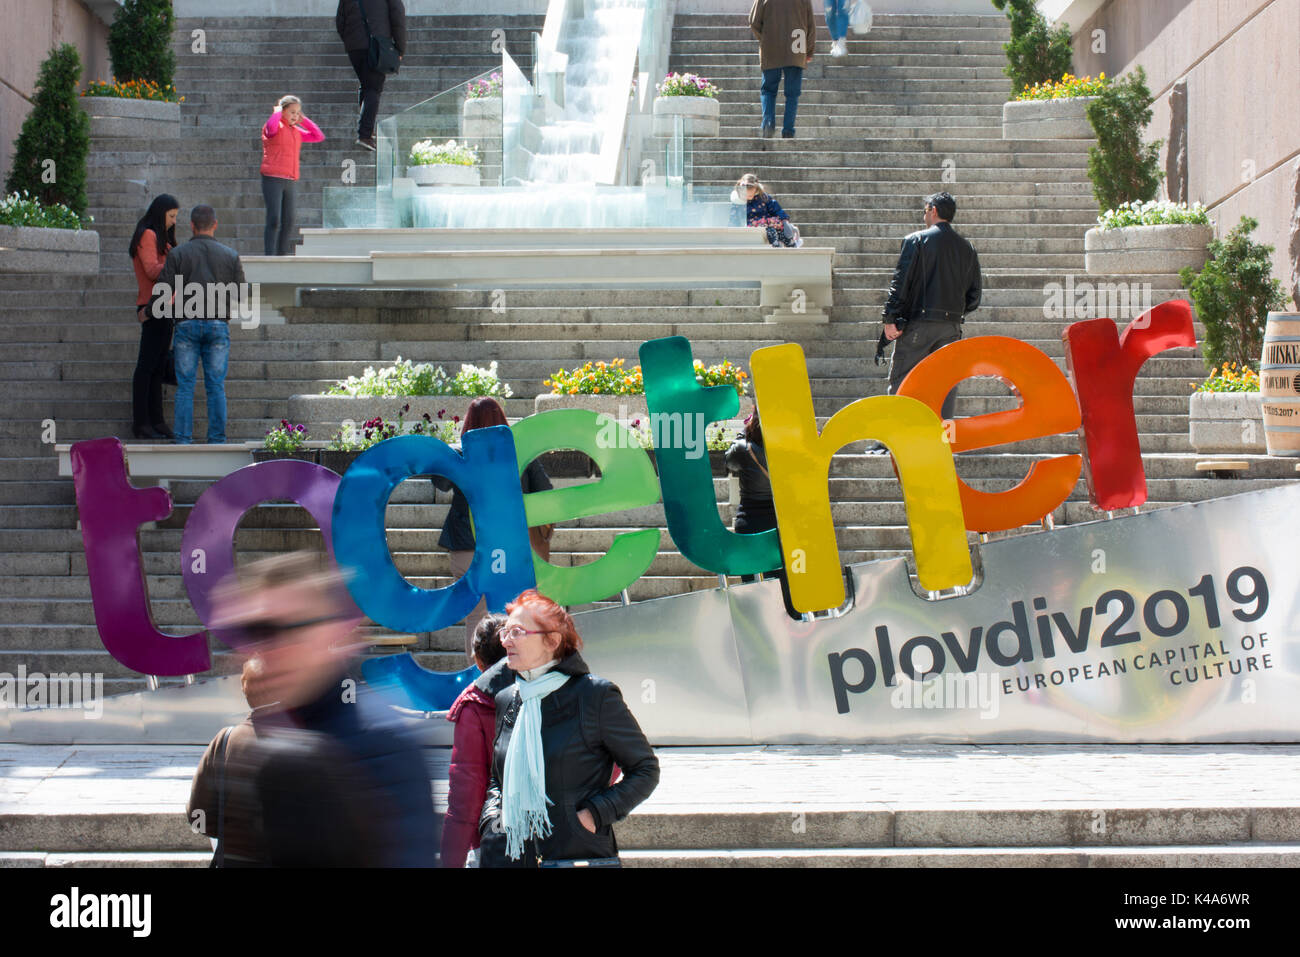 Plovdiv has been designated the European Capital of Culture in Bulgaria for 2019.  This is a cultural event to promote local and European dimensions. Stock Photo